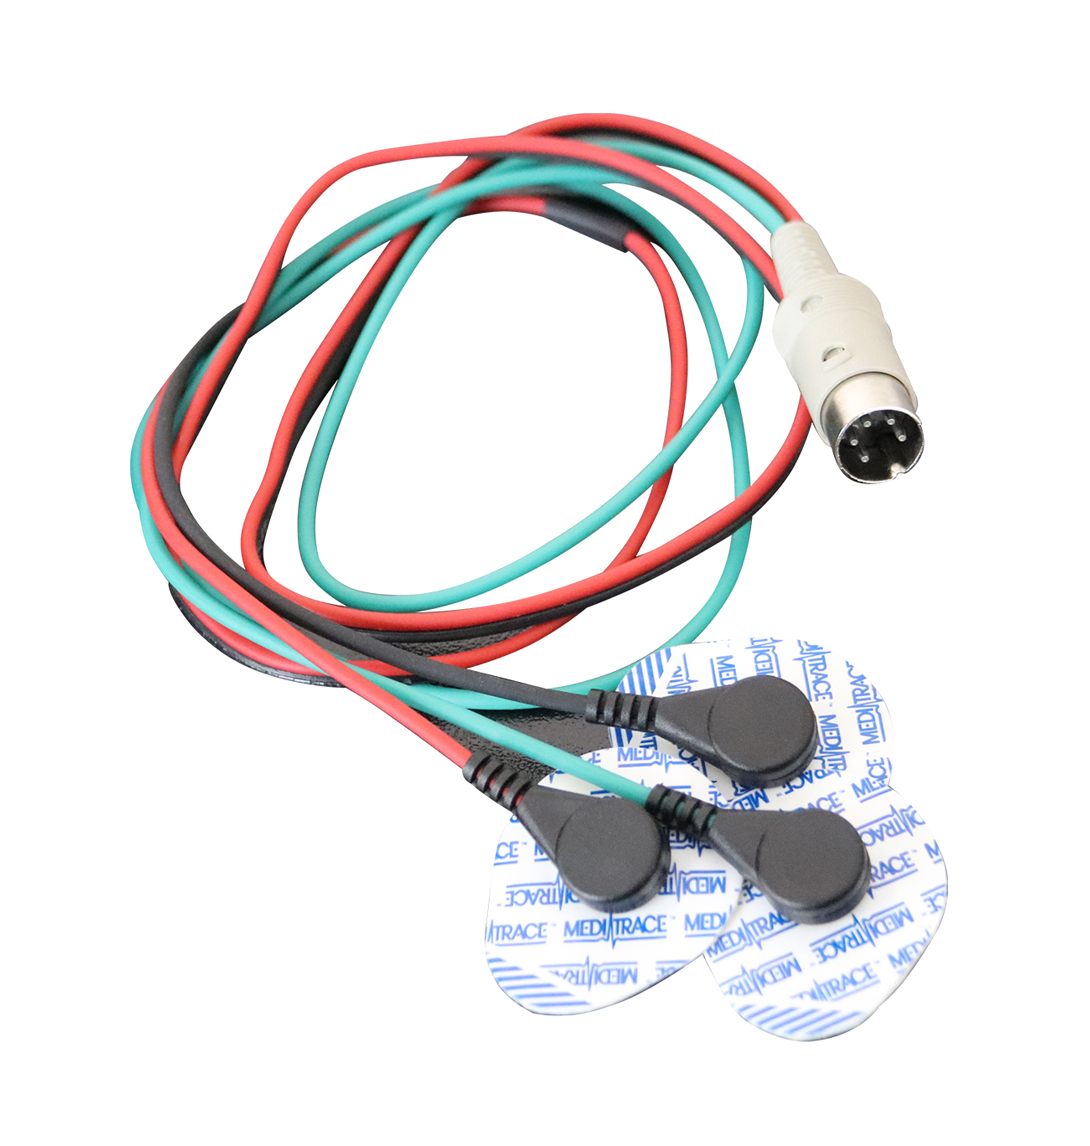 Electromyography cable